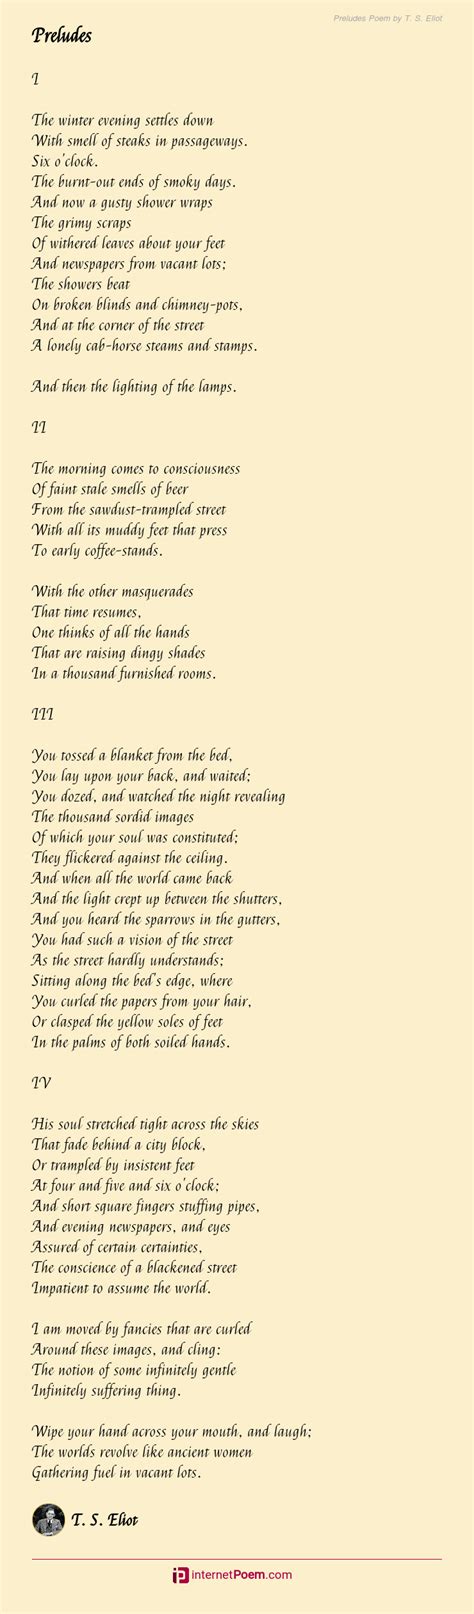 Preludes Poem by T. S. Eliot